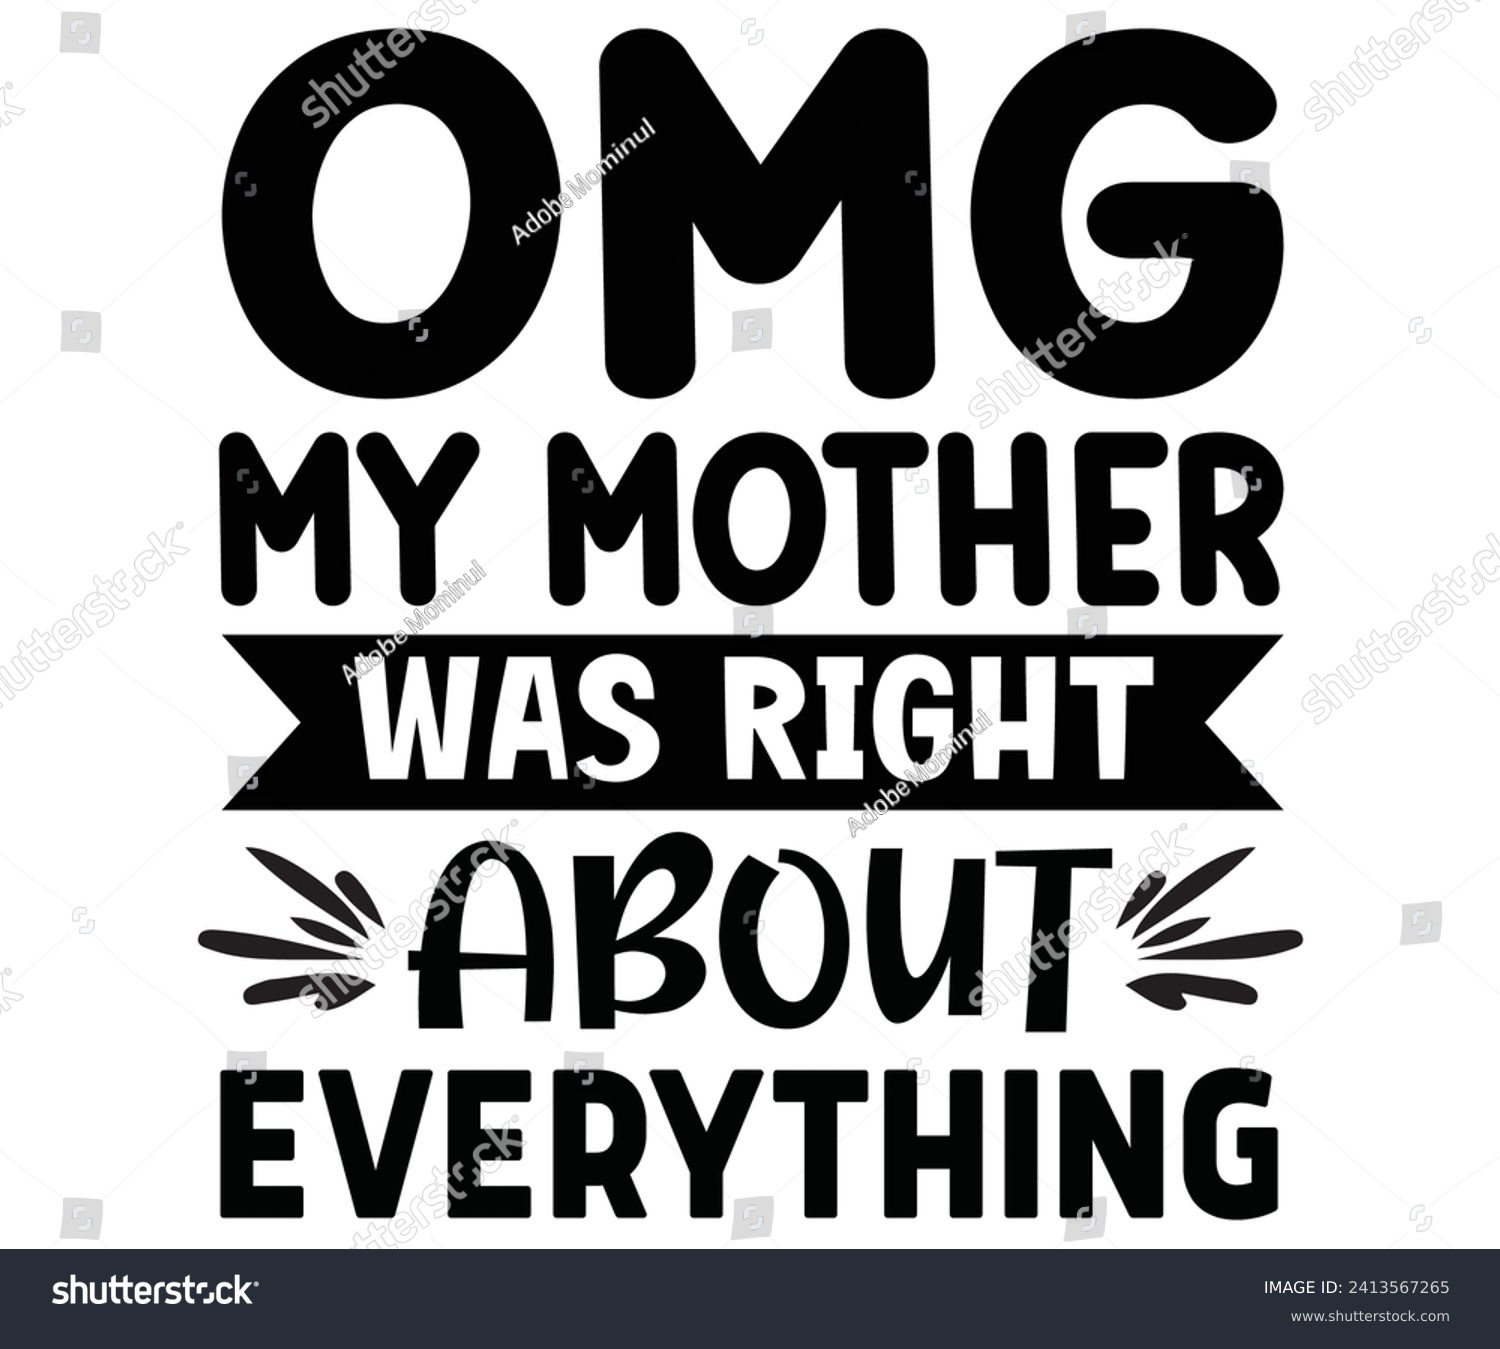 SVG of Omg My Mother Was Right About Everything Svg,Mothers Day Svg,Png,Mom Quotes Svg,Funny Mom Svg,Gift For Mom Svg,Mom life Svg,Mama Svg,Mommy T-shirt Design,Svg Cut File,Dog Mom deisn,Retro Groovy, svg